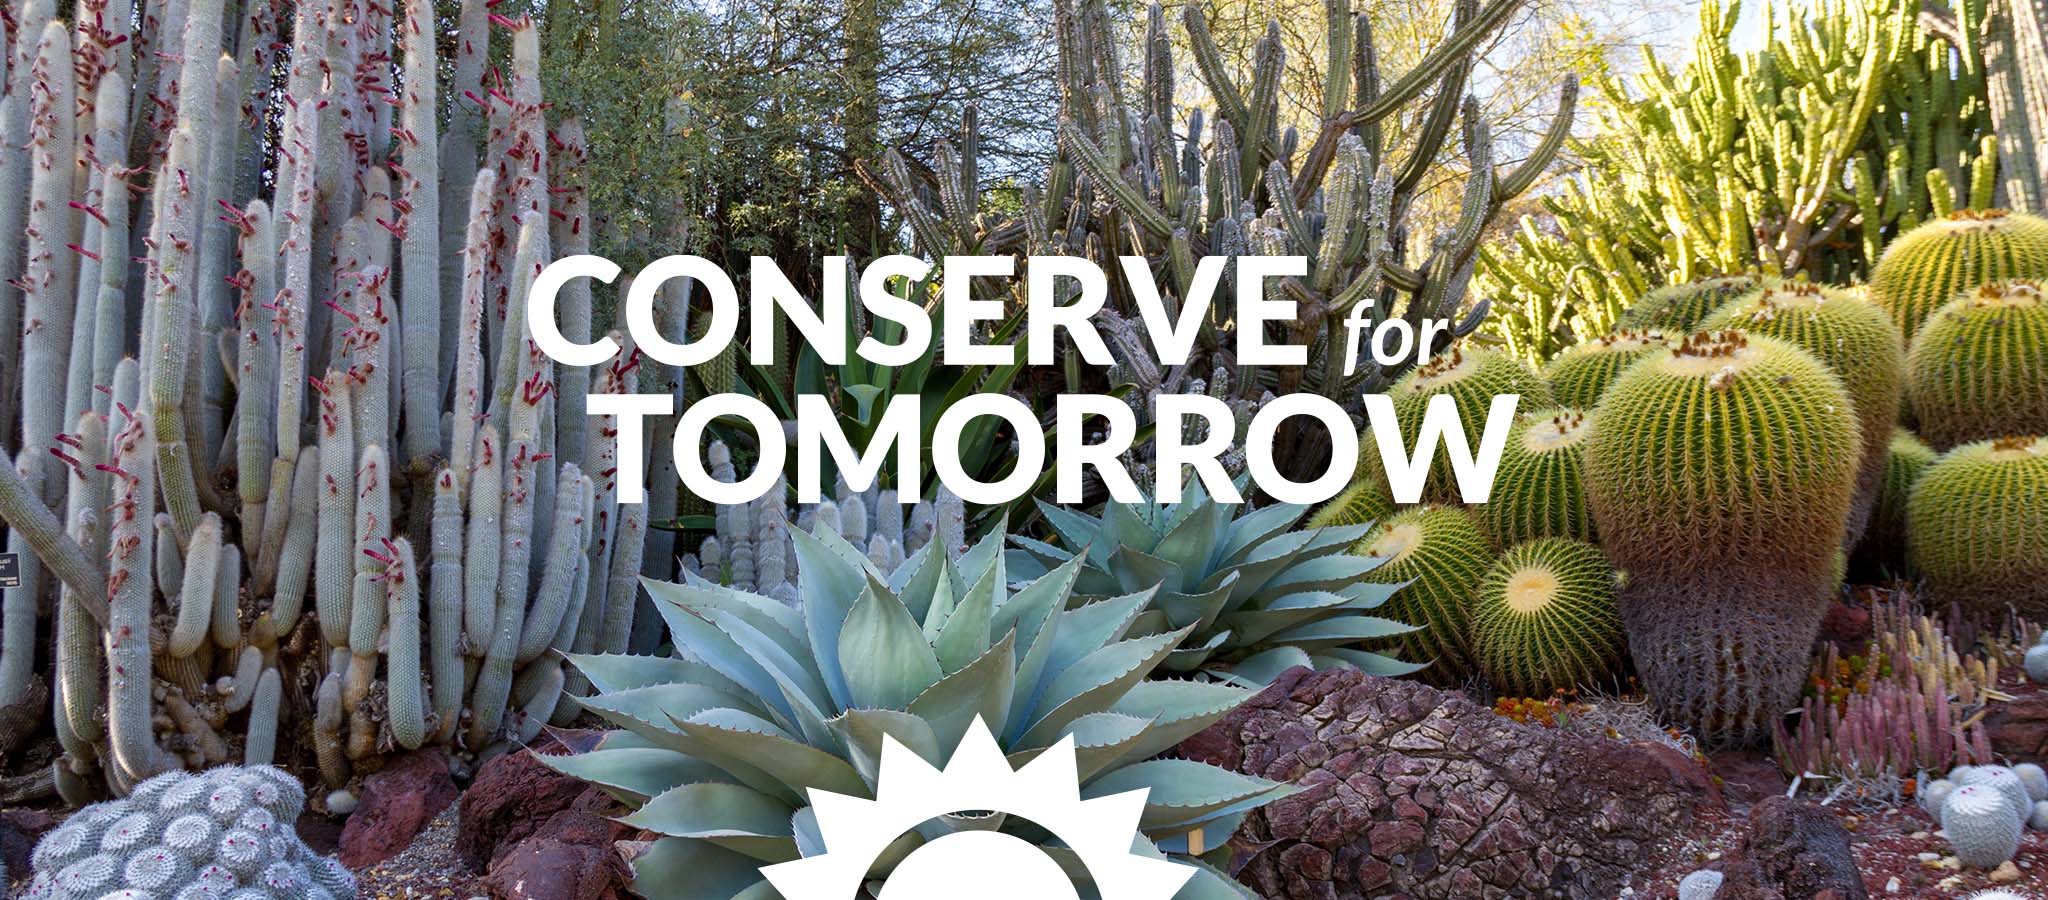 Conserve for tomorrow